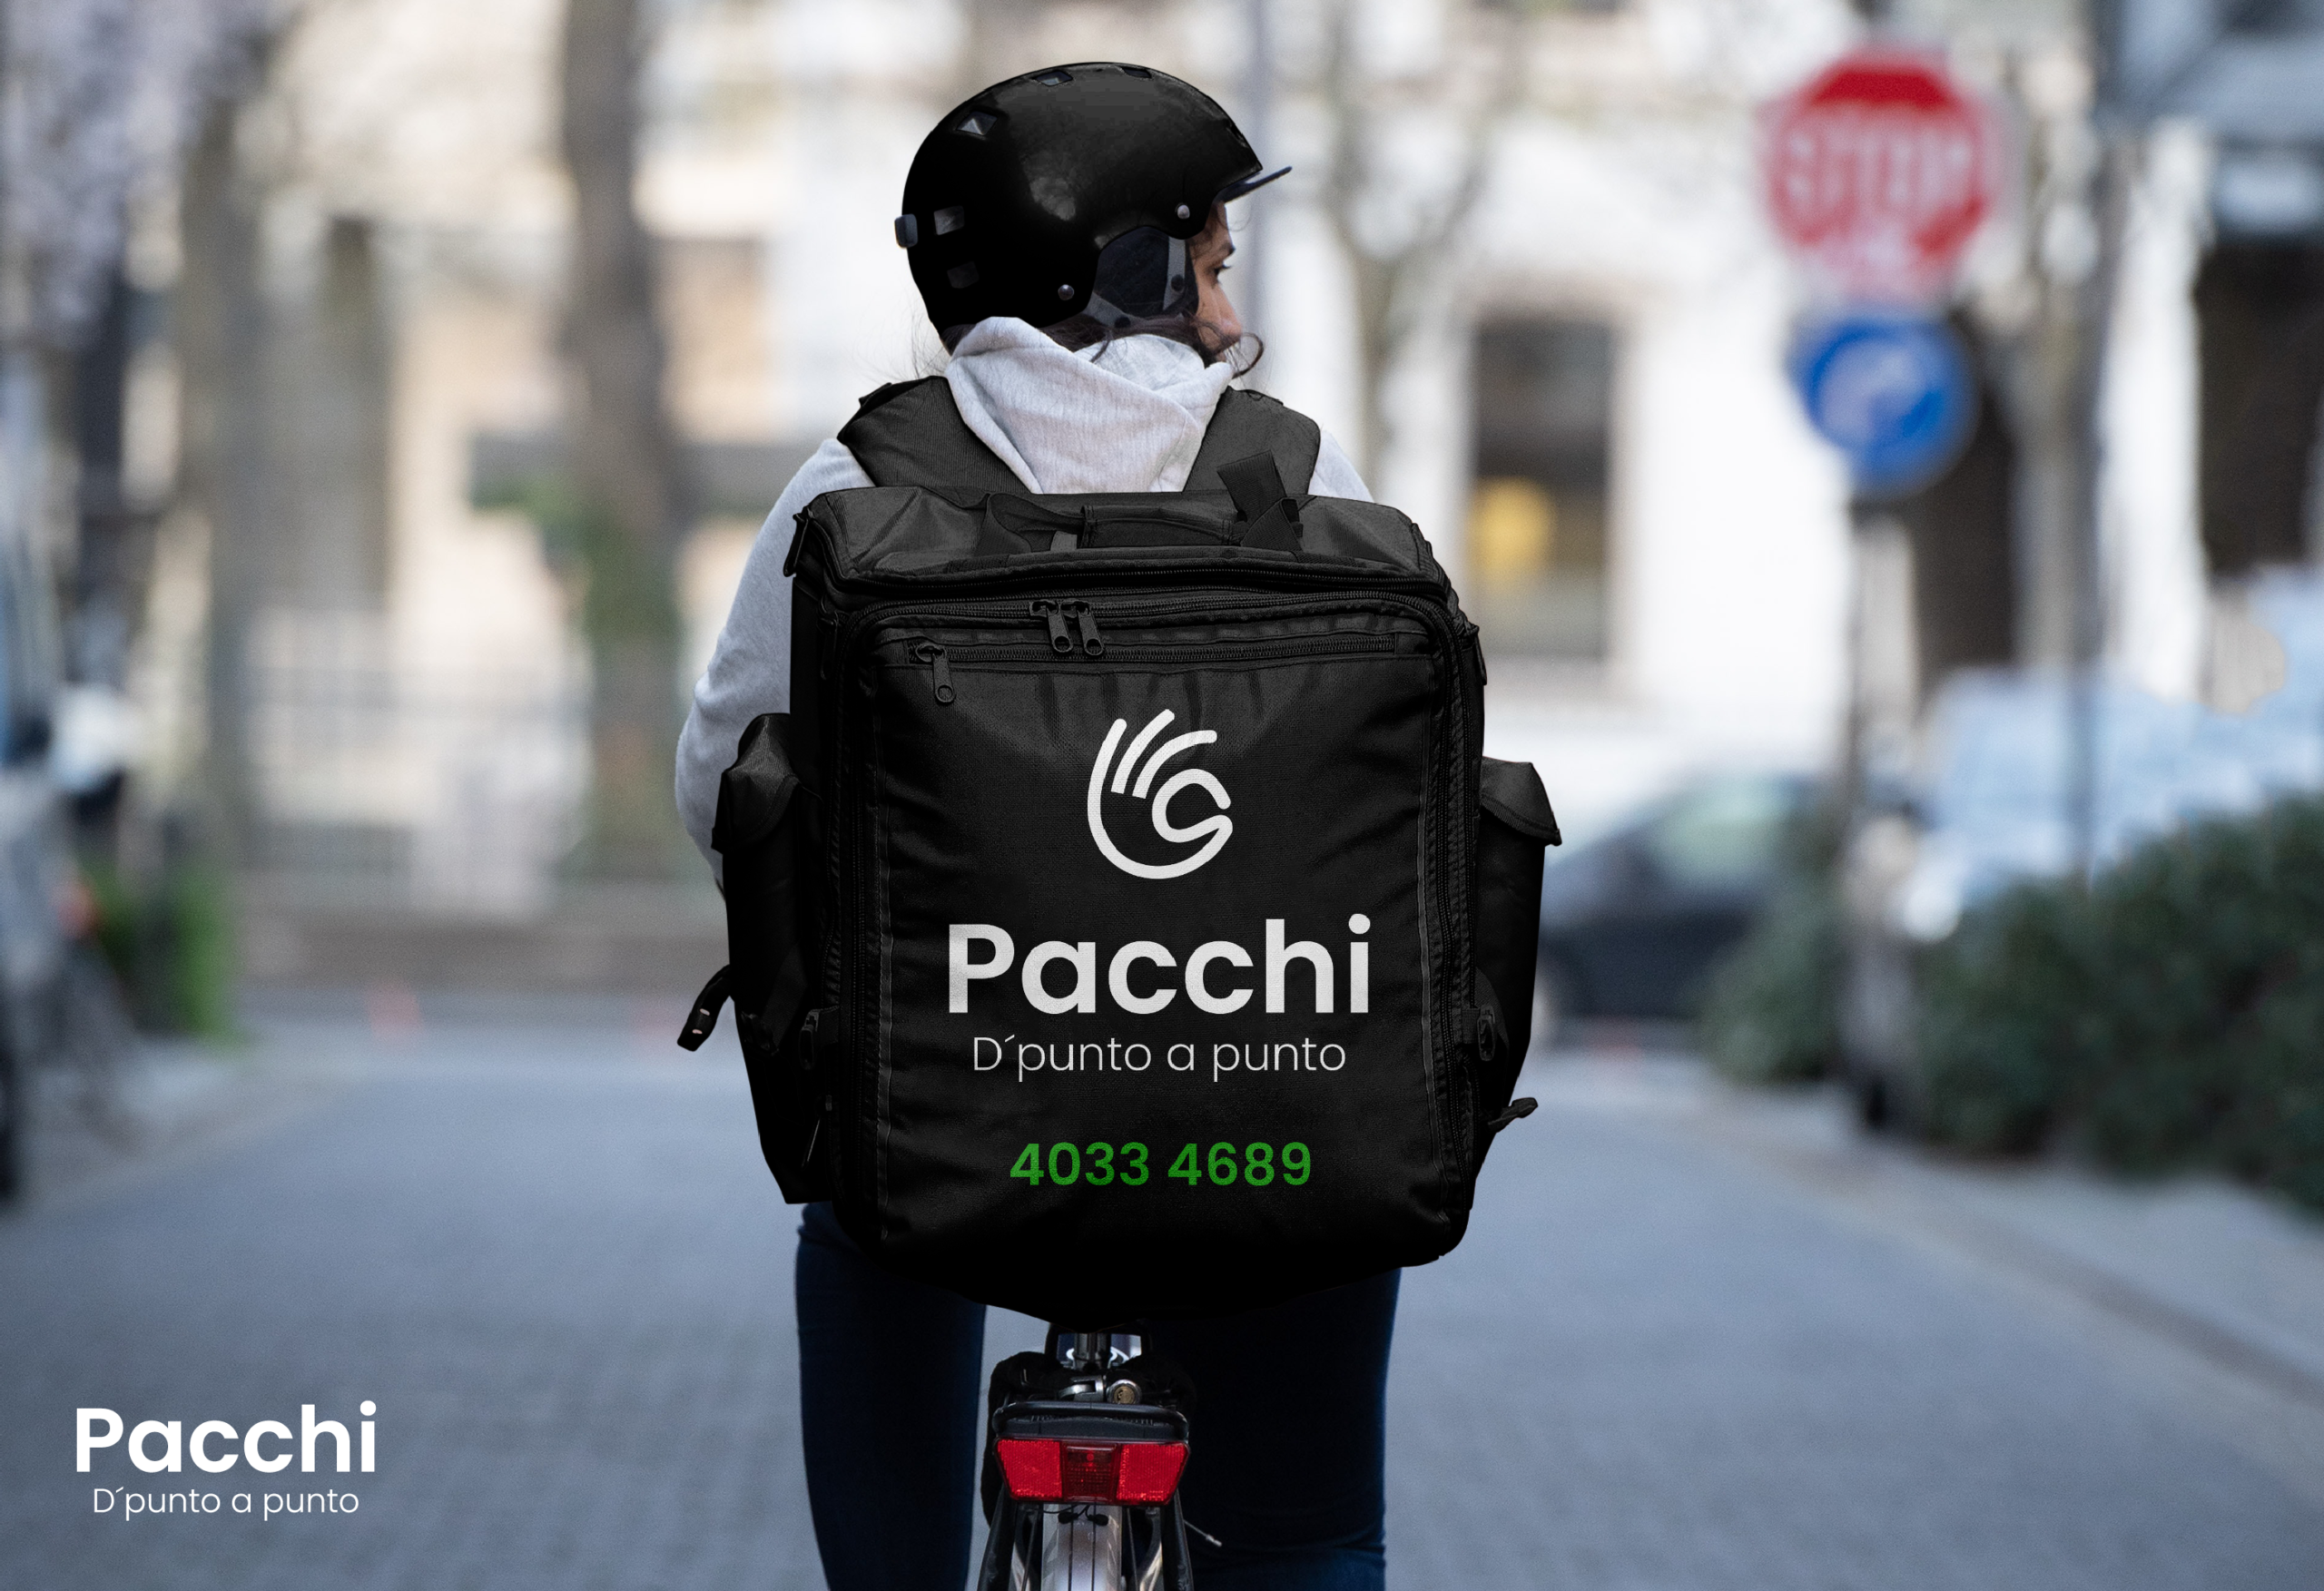 First image: Pacchi Costa Rica Messenger with a bag.